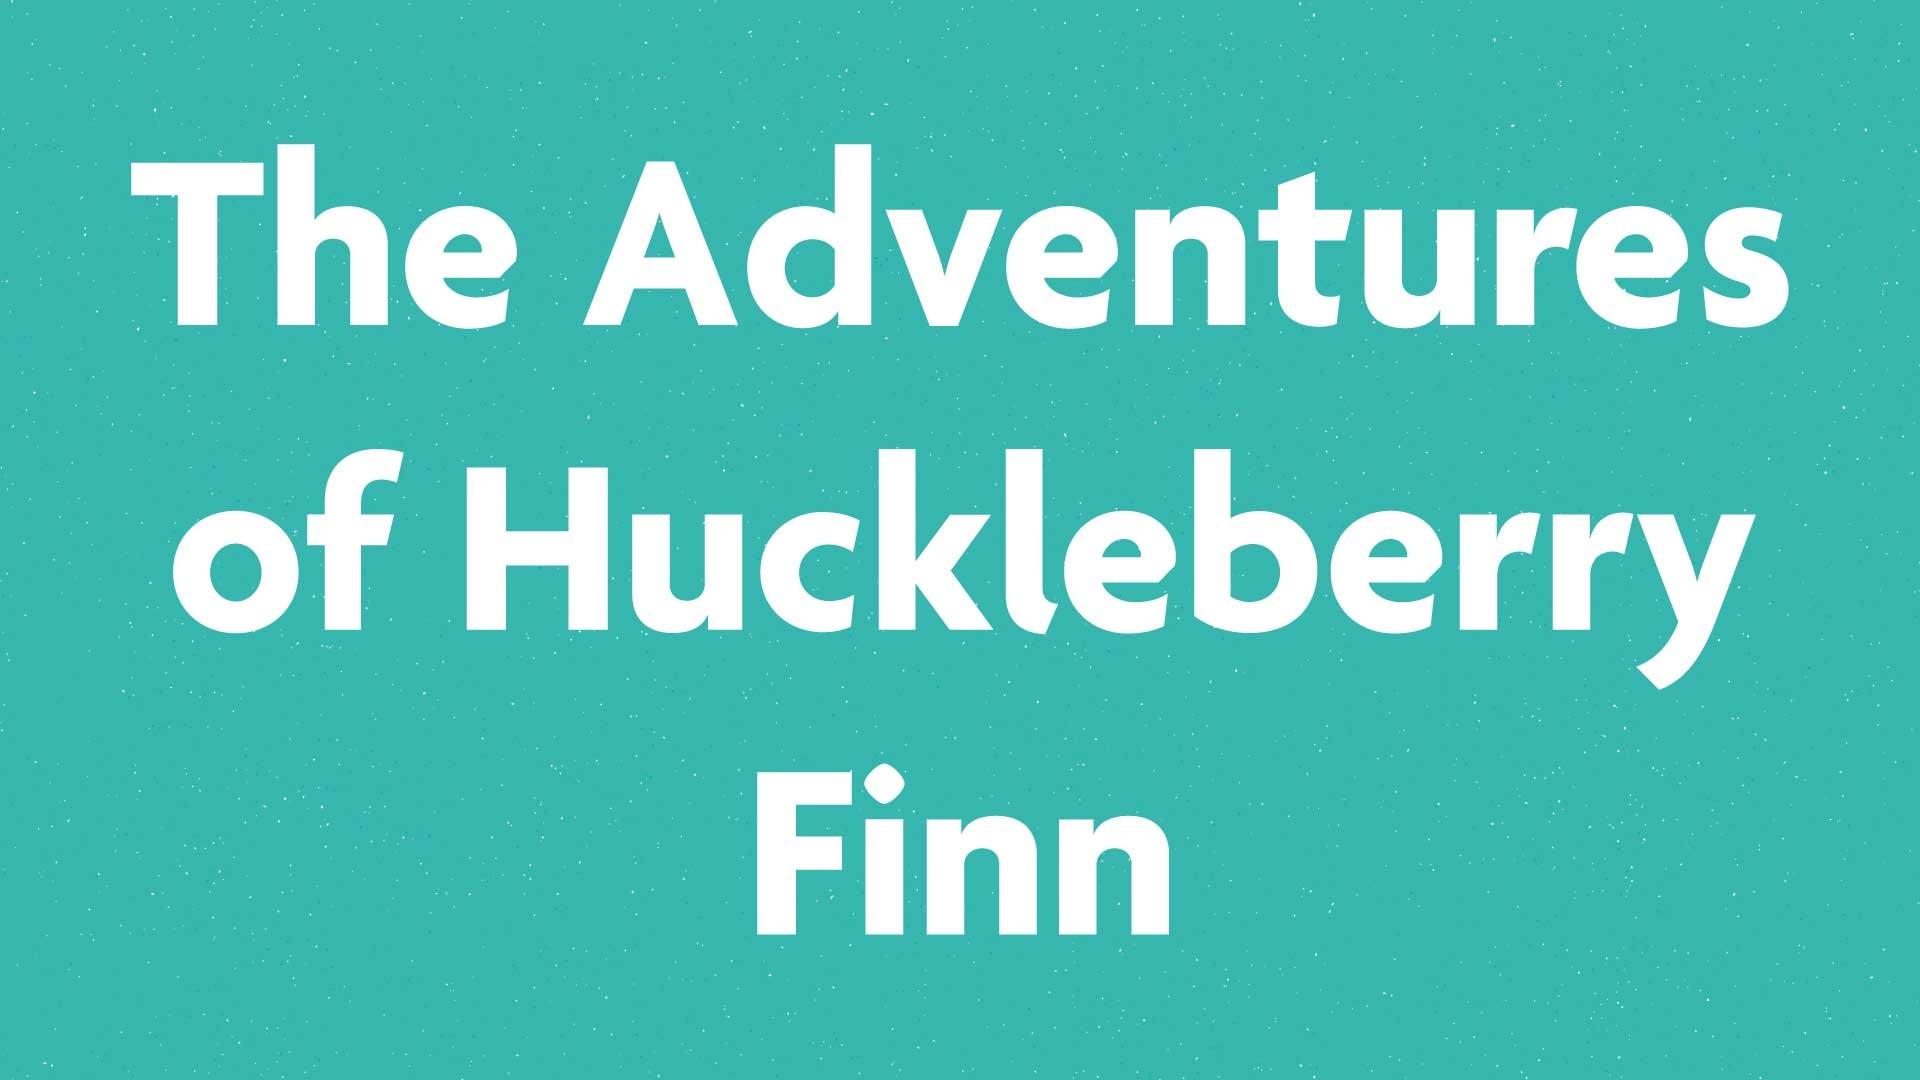 The Adventures of Huckleberry Finn book submission card on a green background.